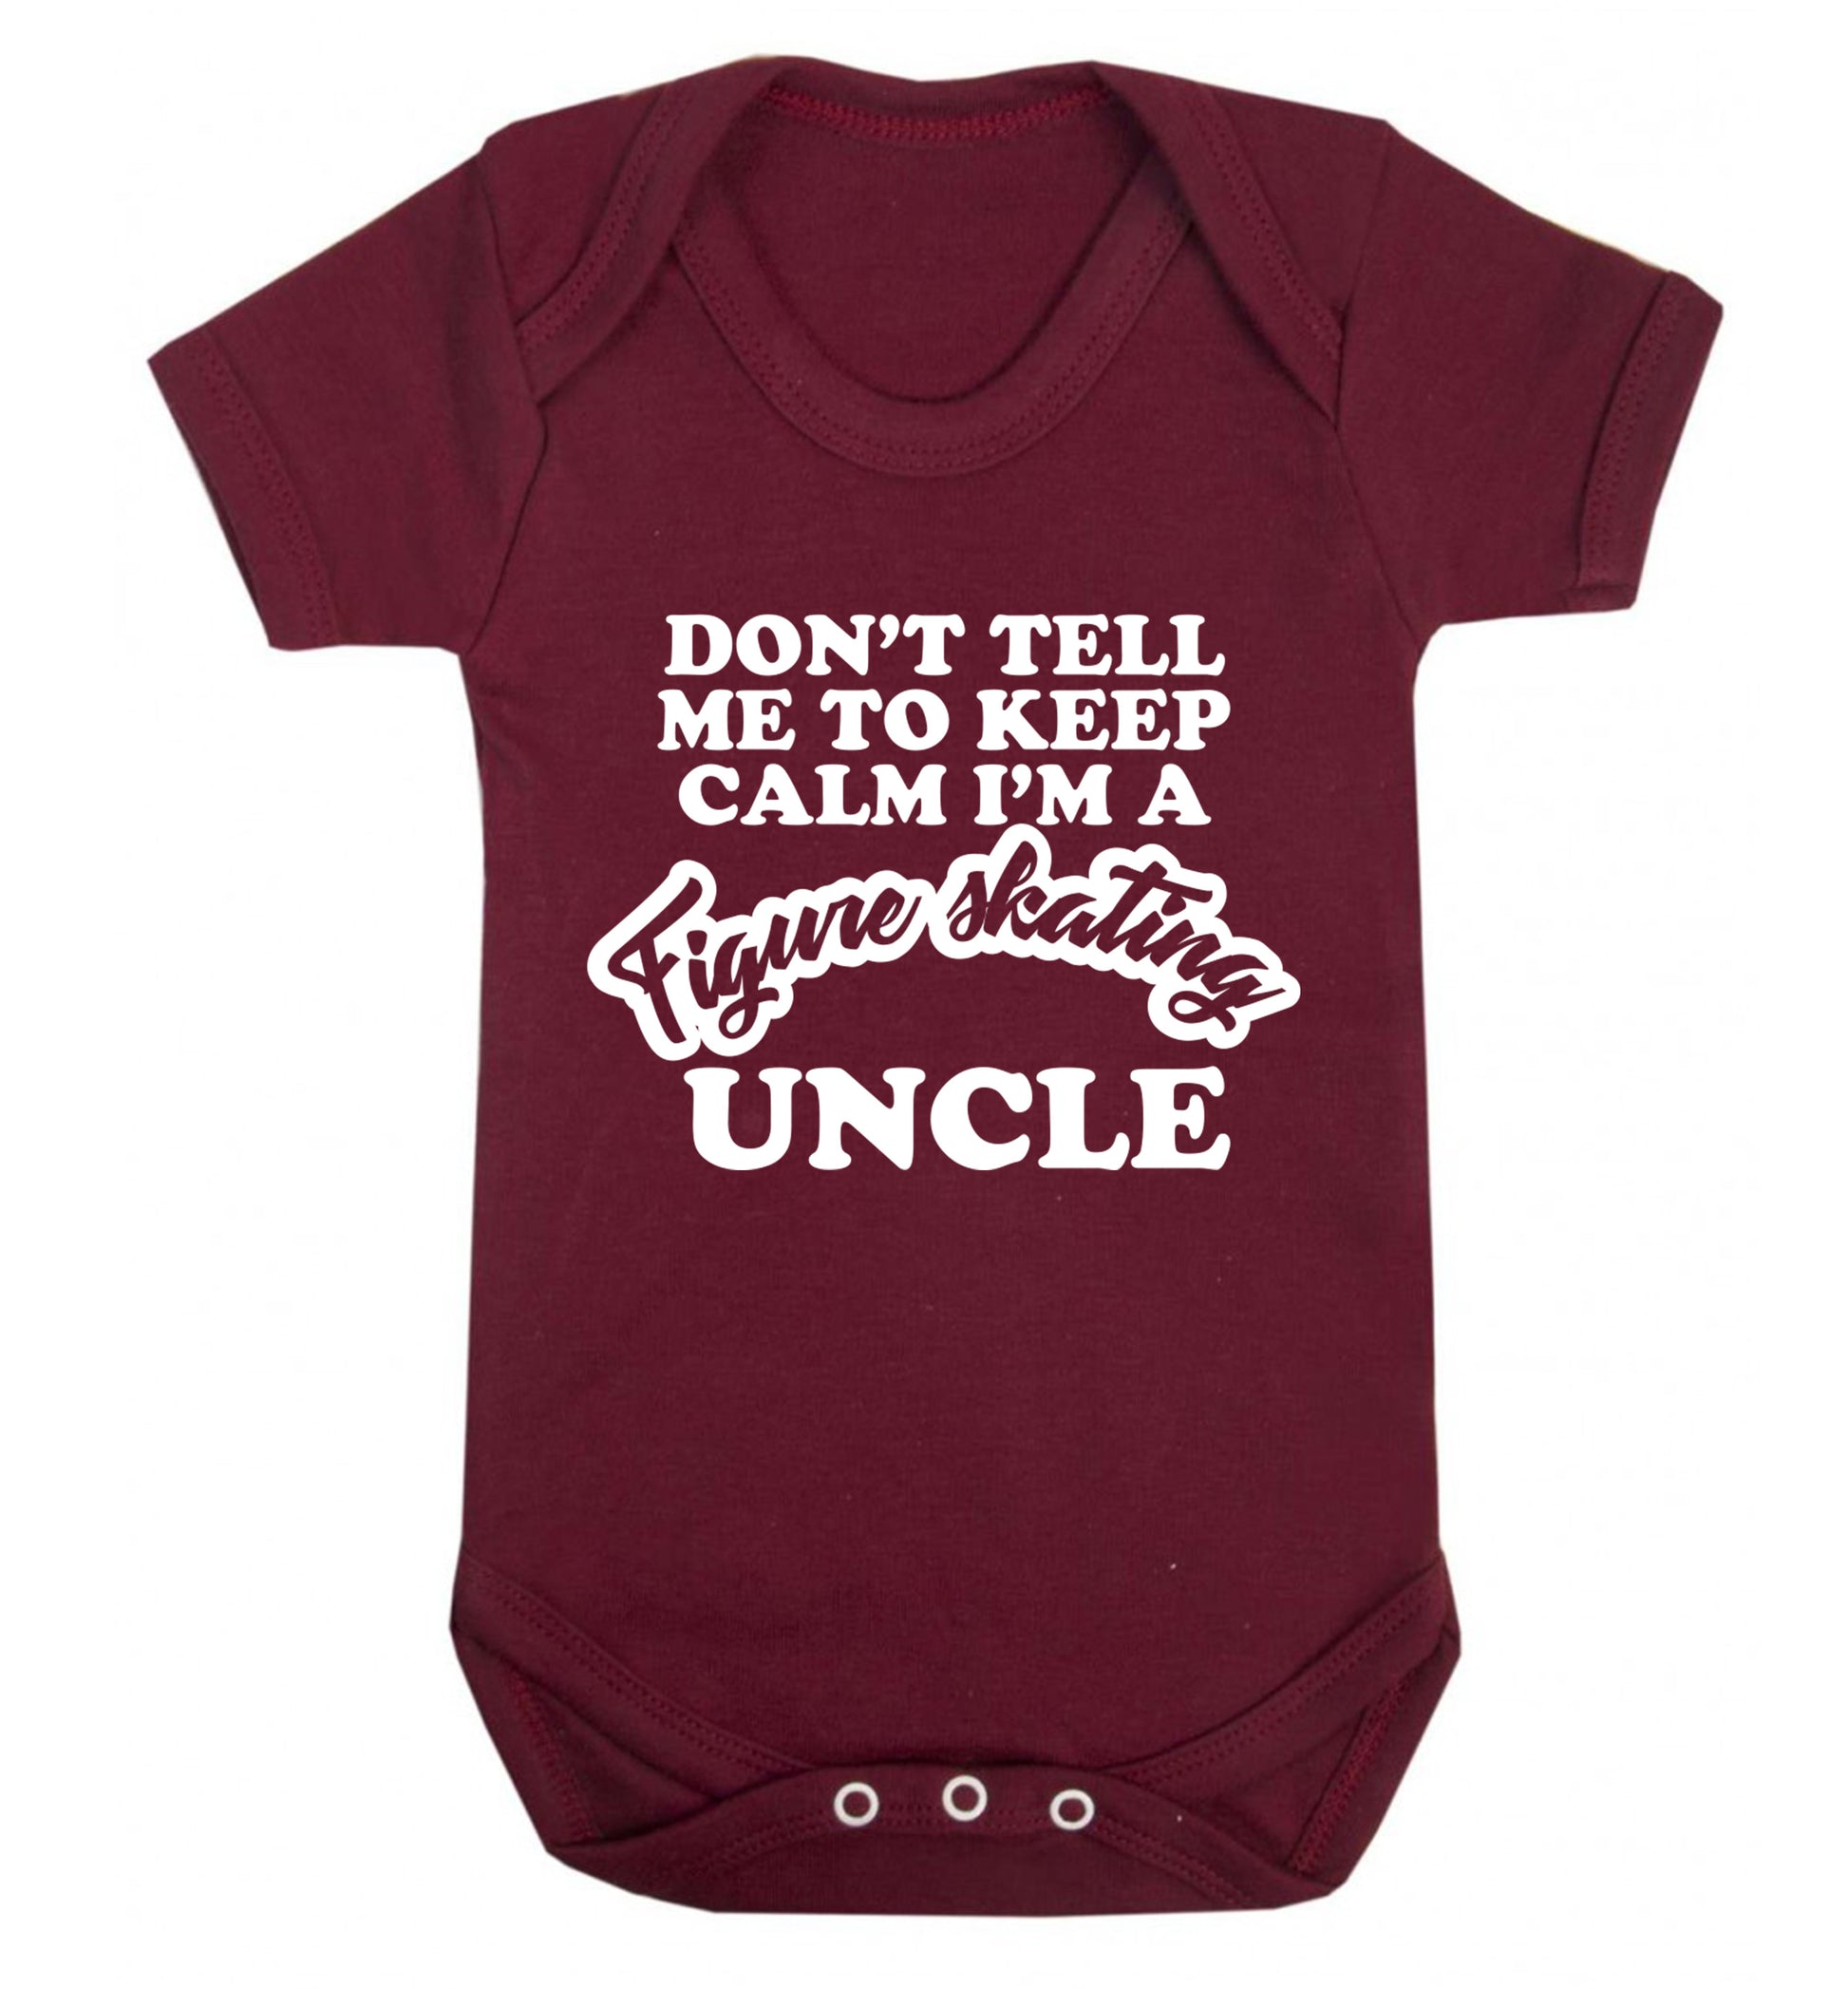 Don't tell me to keep calm I'm a figure skating uncle Baby Vest maroon 18-24 months